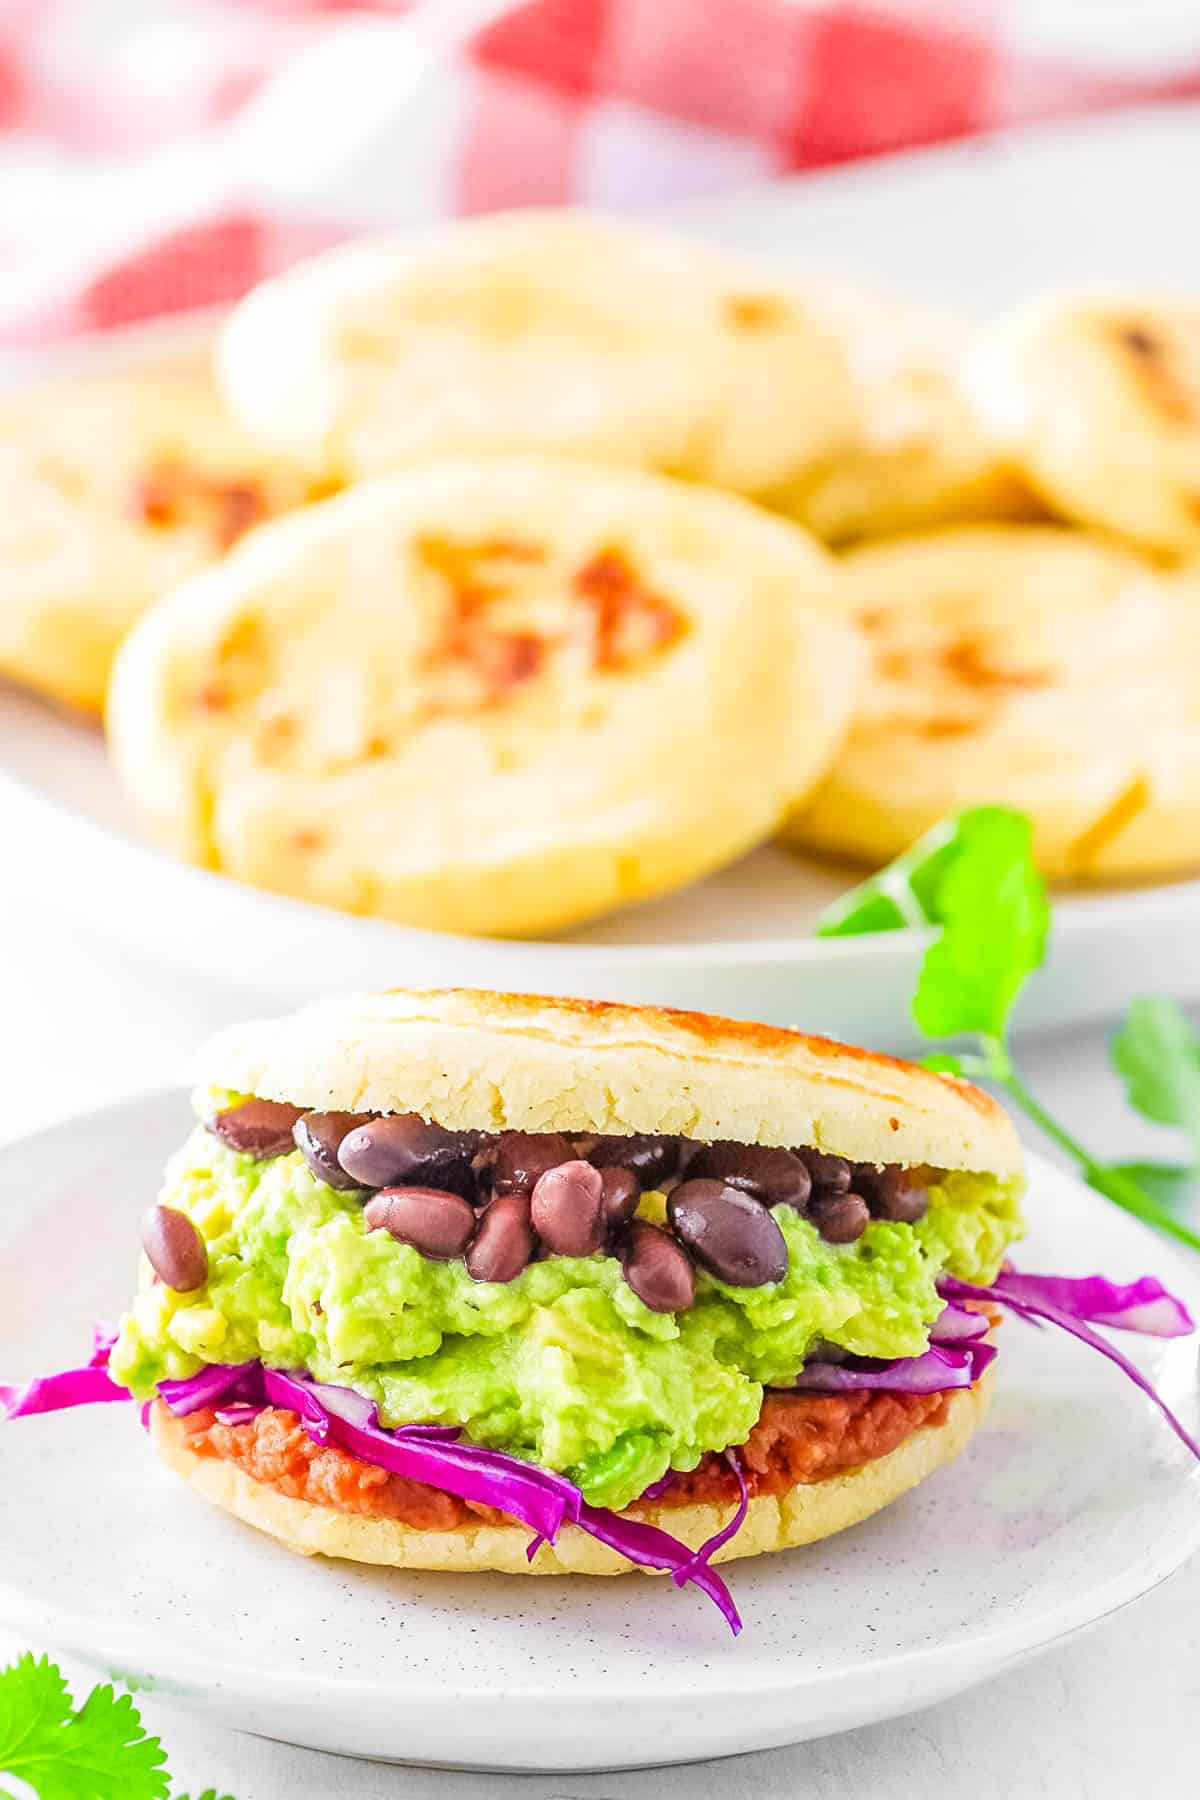 Vegan arepas stuffed with black beans, avocado and cabbage filling, served on a white plate.